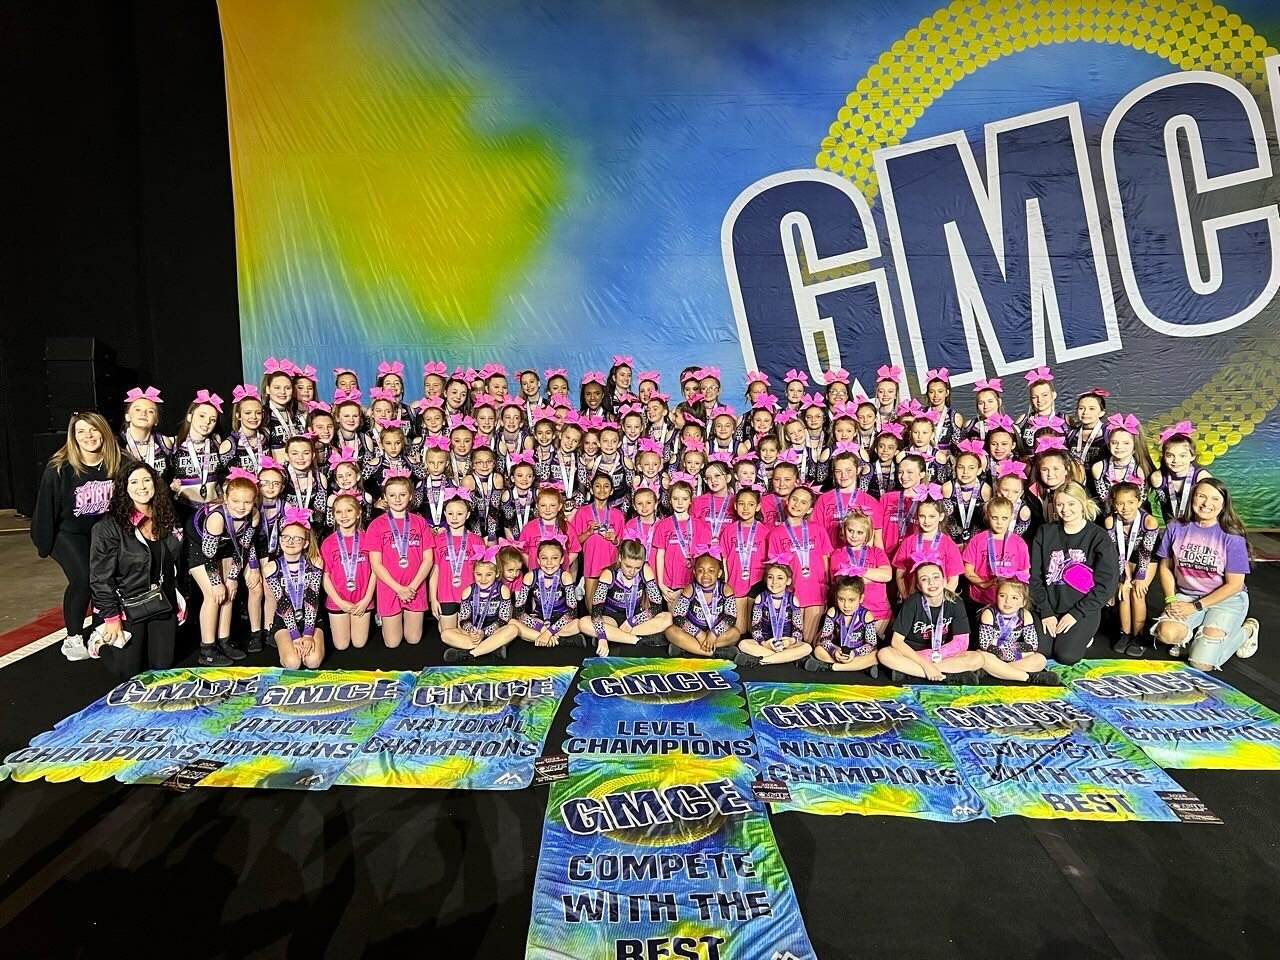 What a fabulous day we had with 8 of our teams here at @competegmce 💖 

&bull;&bull;&bull;&bull;
⭐️Level 1 Grand Champ - Cheetah Girls 
⭐️Level 2 Grand Champ - Pink Panthers 

Mini Cheetahs &mdash; Excellent &mdash; Hit 0️⃣
Show Cats &mdash; Excelle